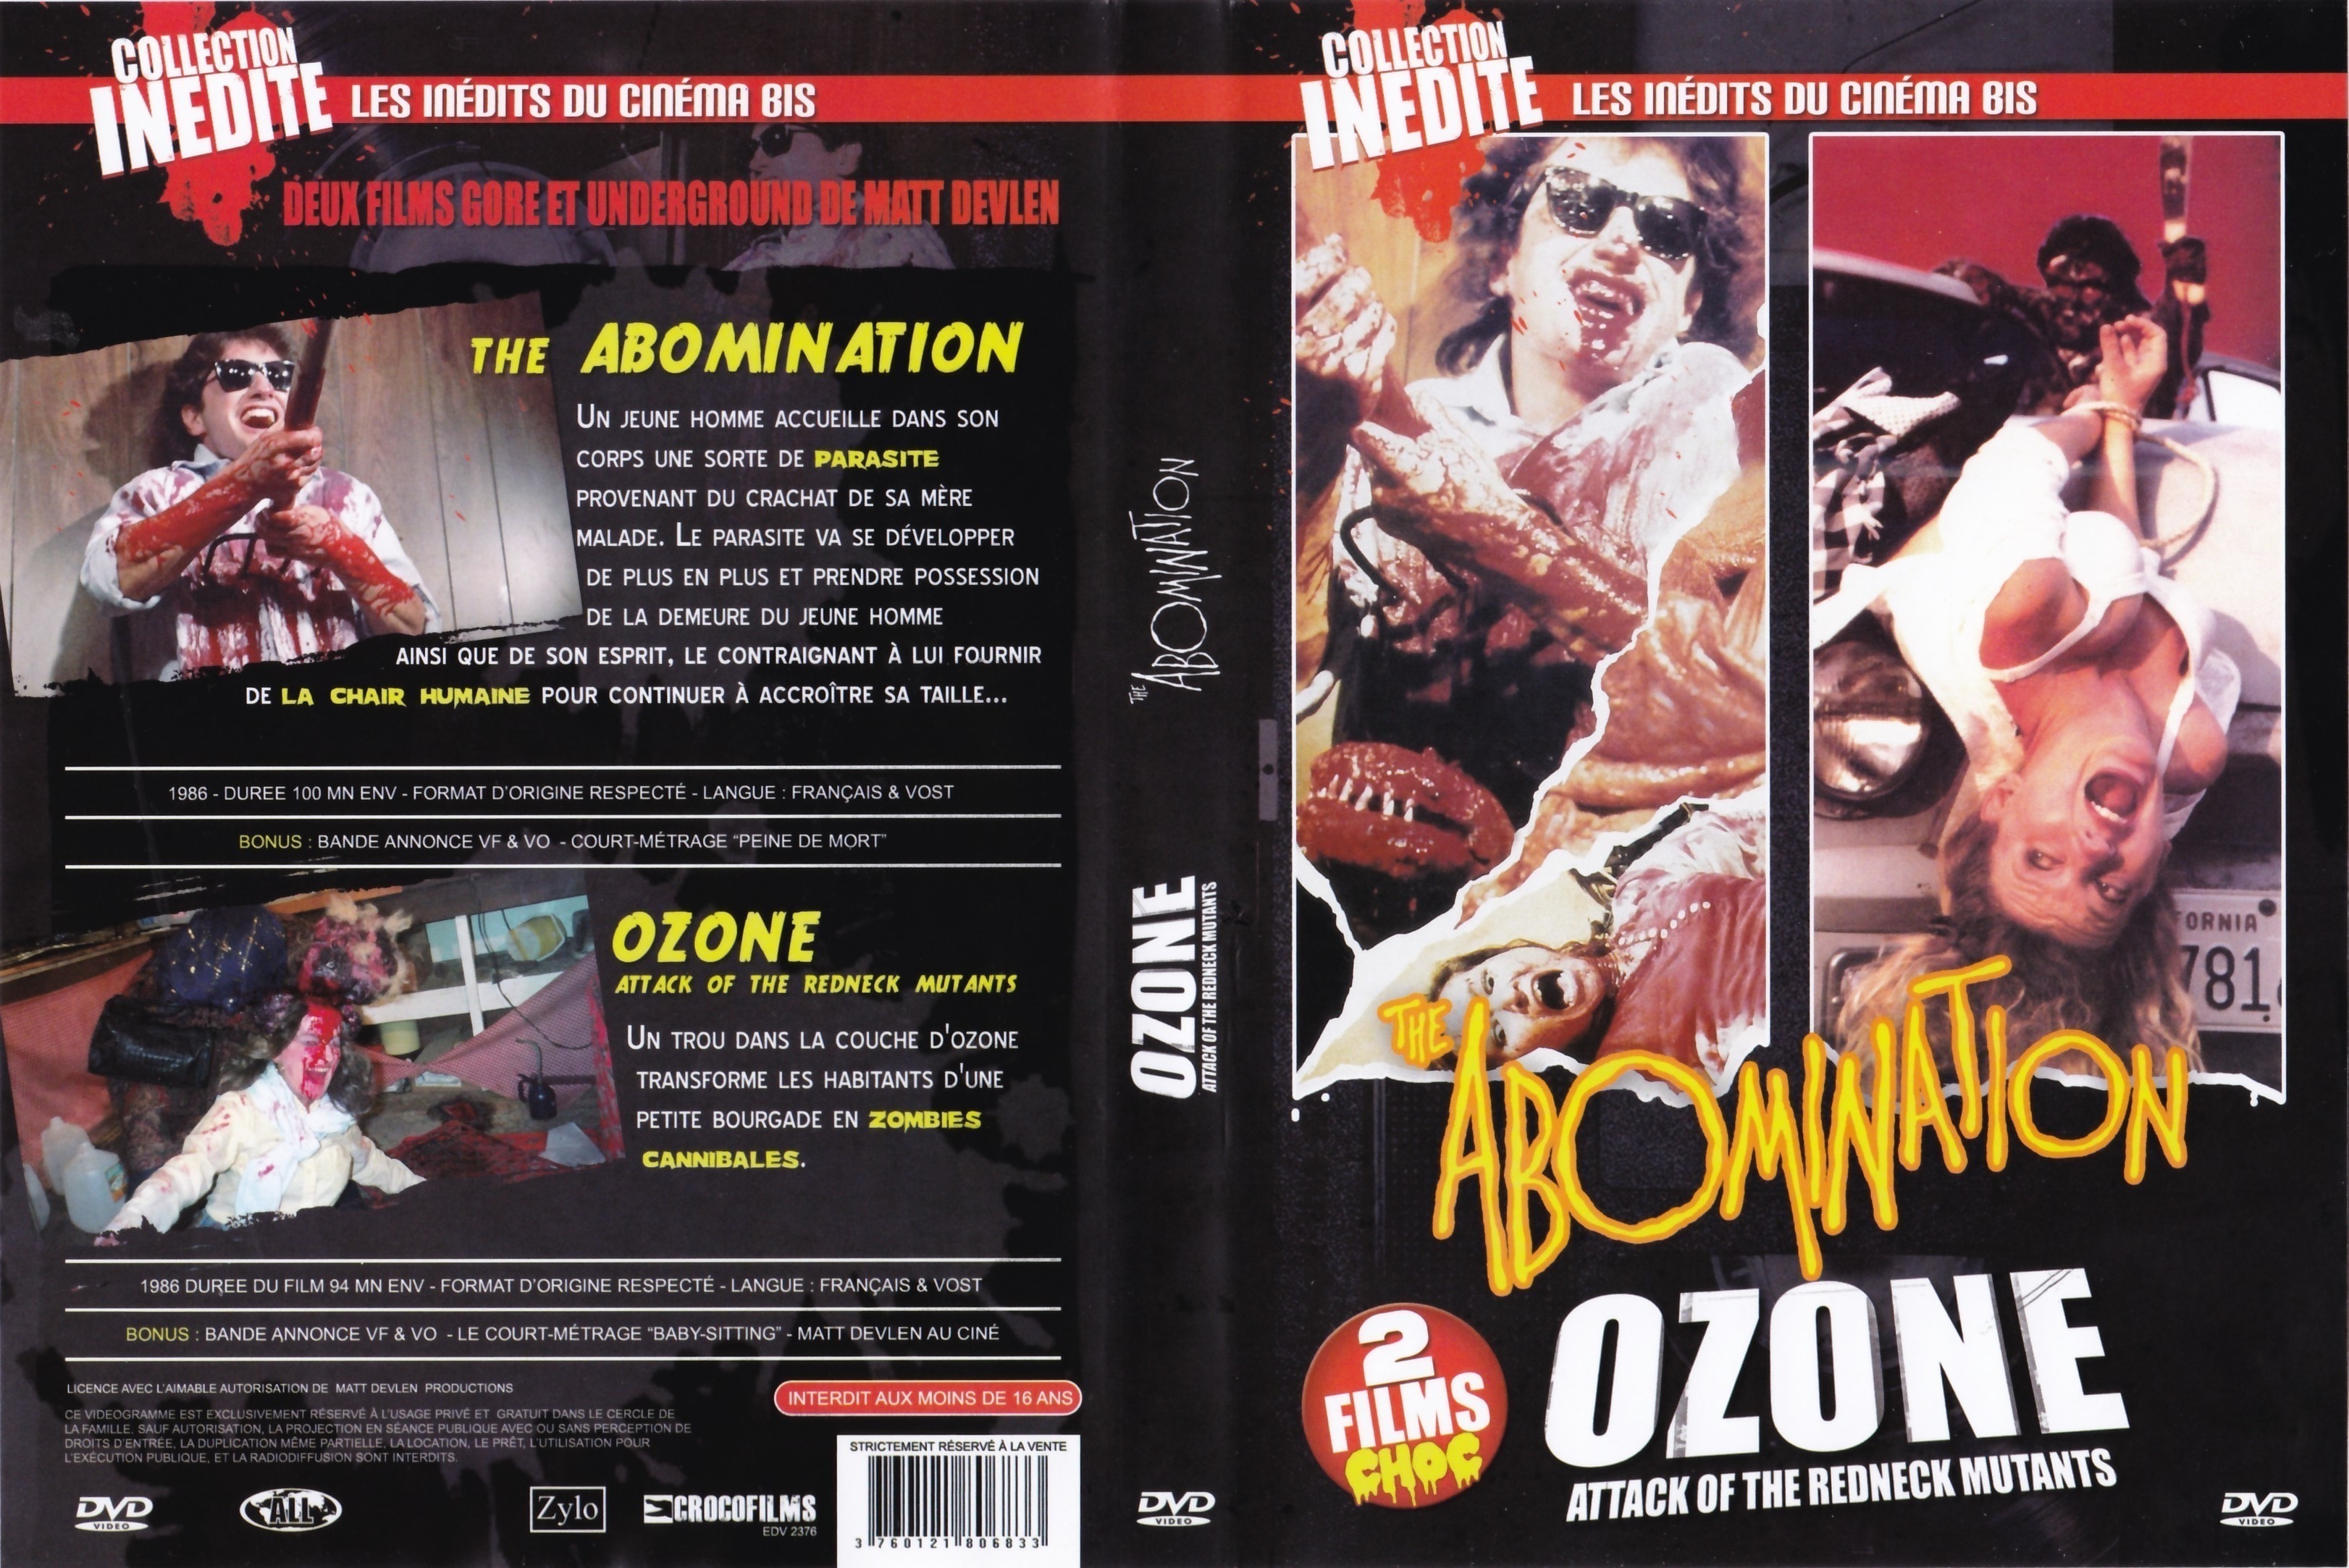 Jaquette DVD Ozone & The Abomination